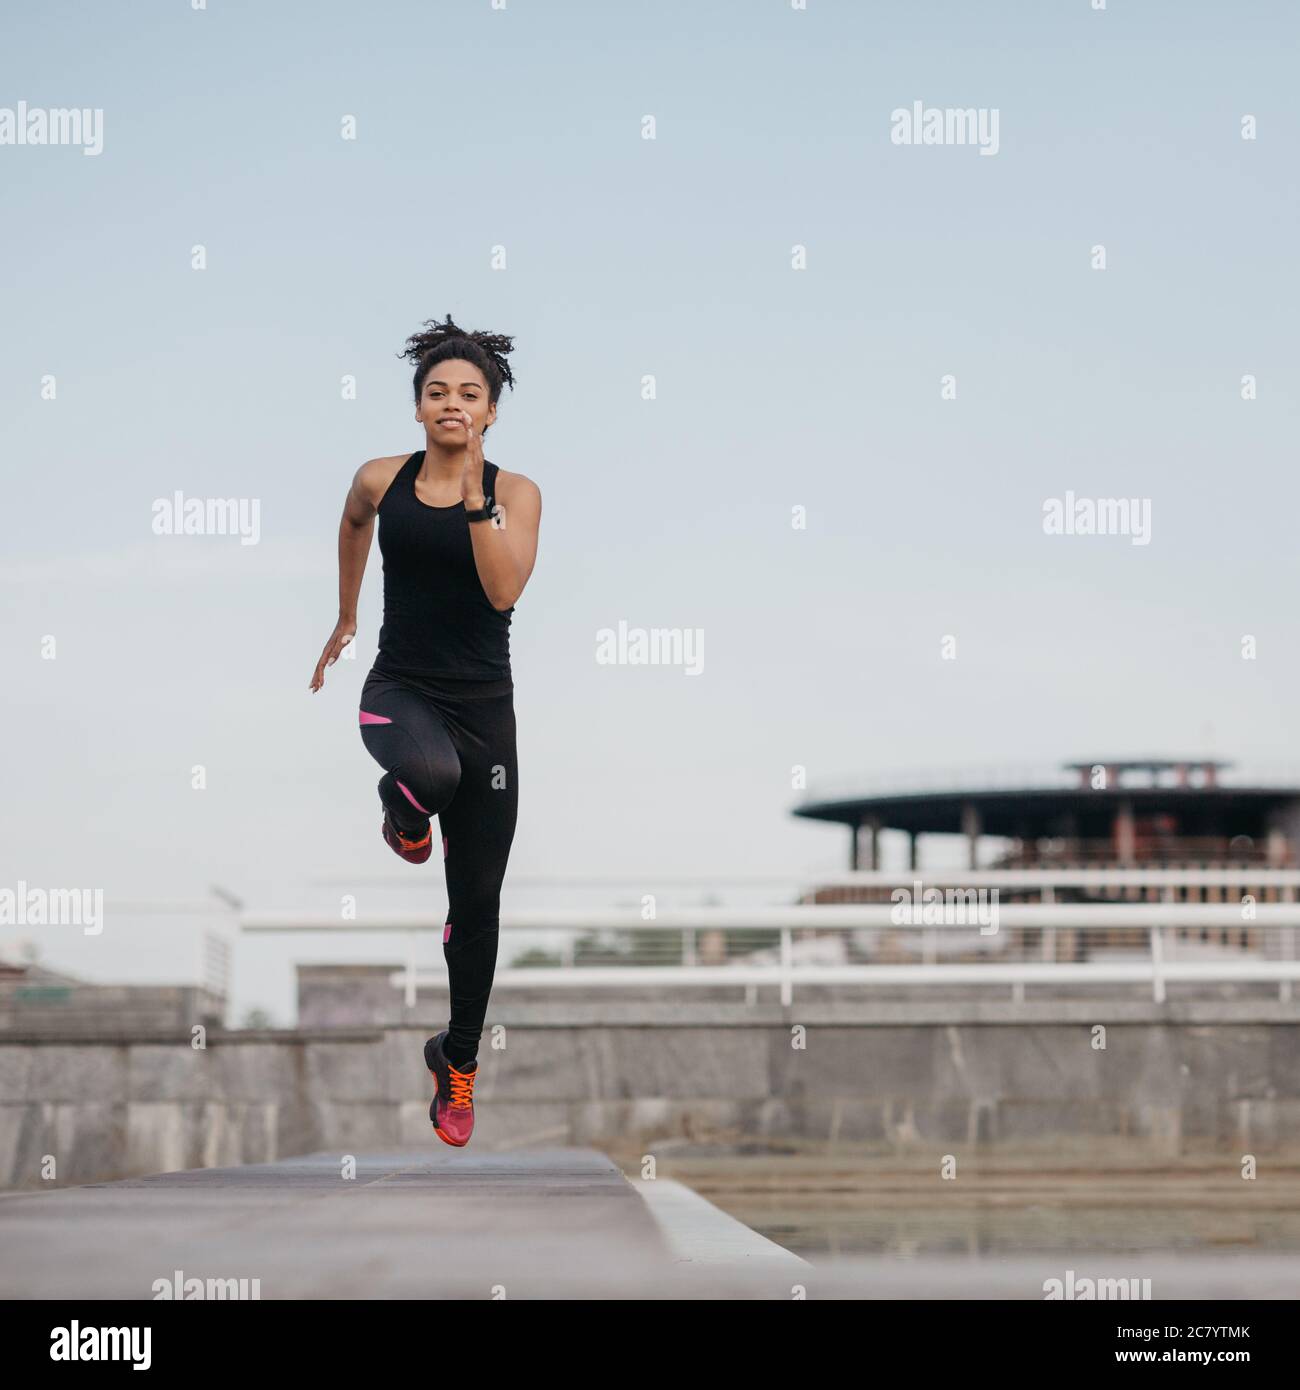 Running with jumps in training. African american girl in sport uniform in jump, on stadium Stock Photo